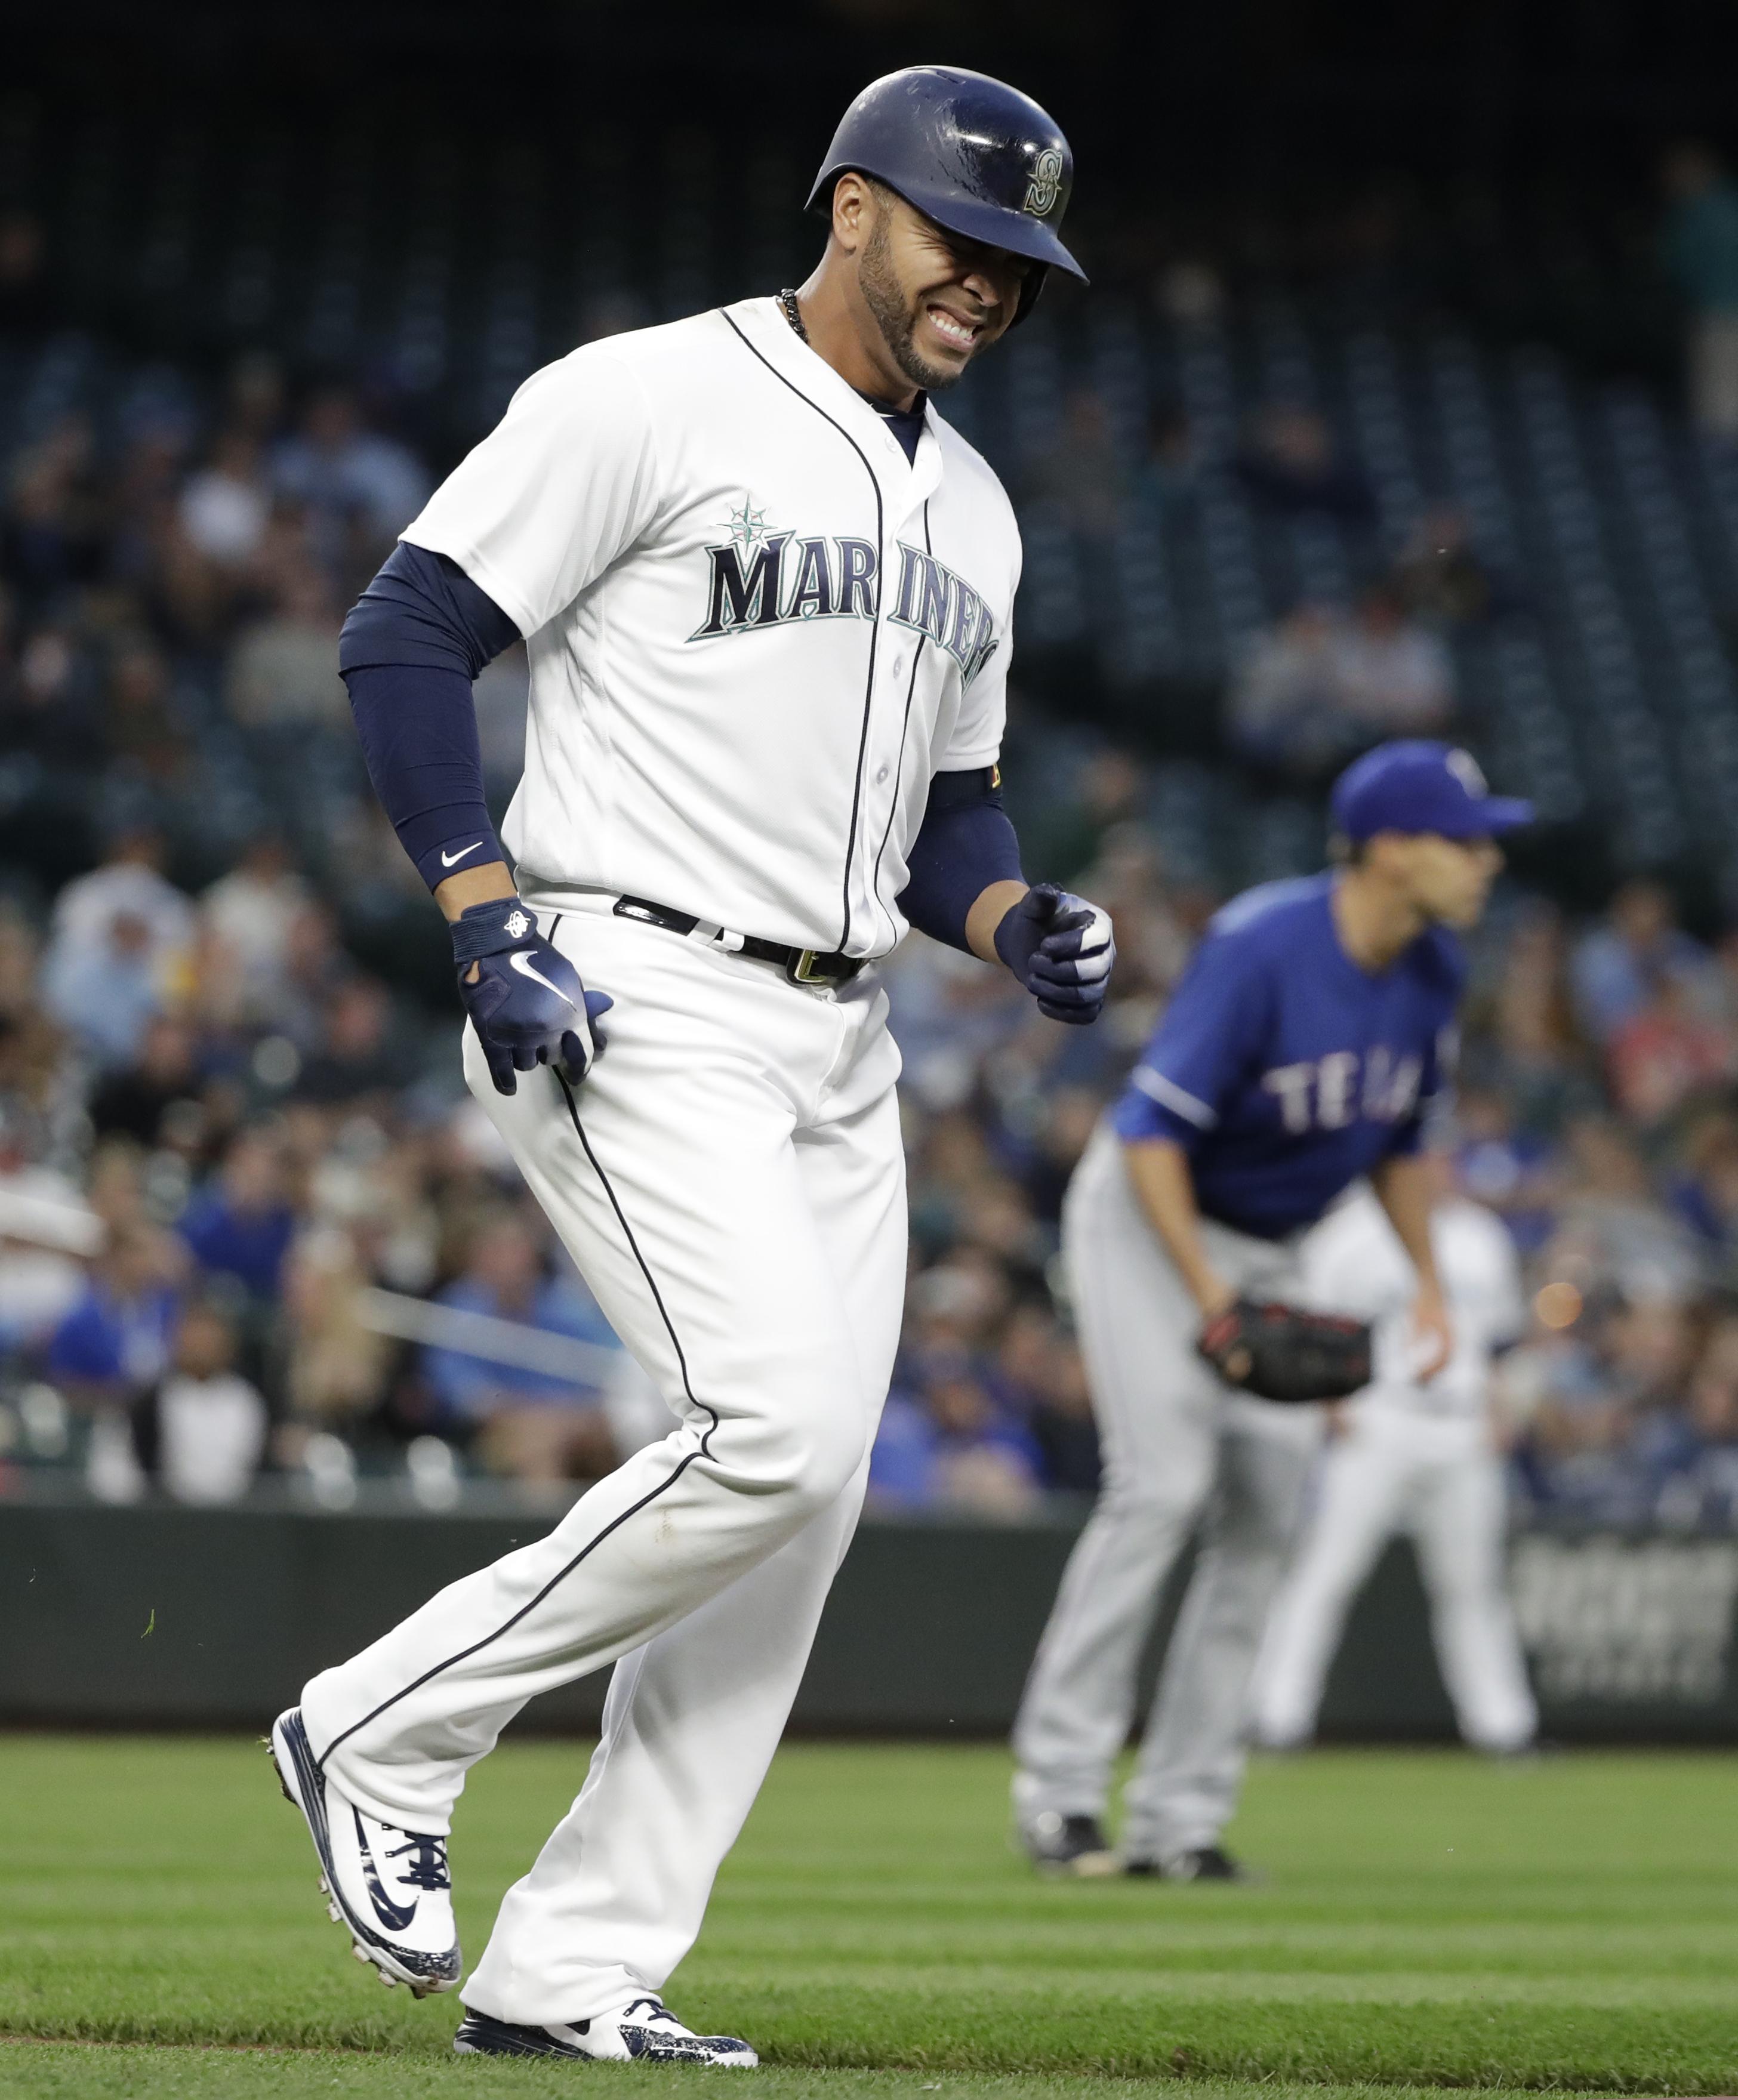 Mariners designated hitter Nelson Cruz pulled with bruised foot